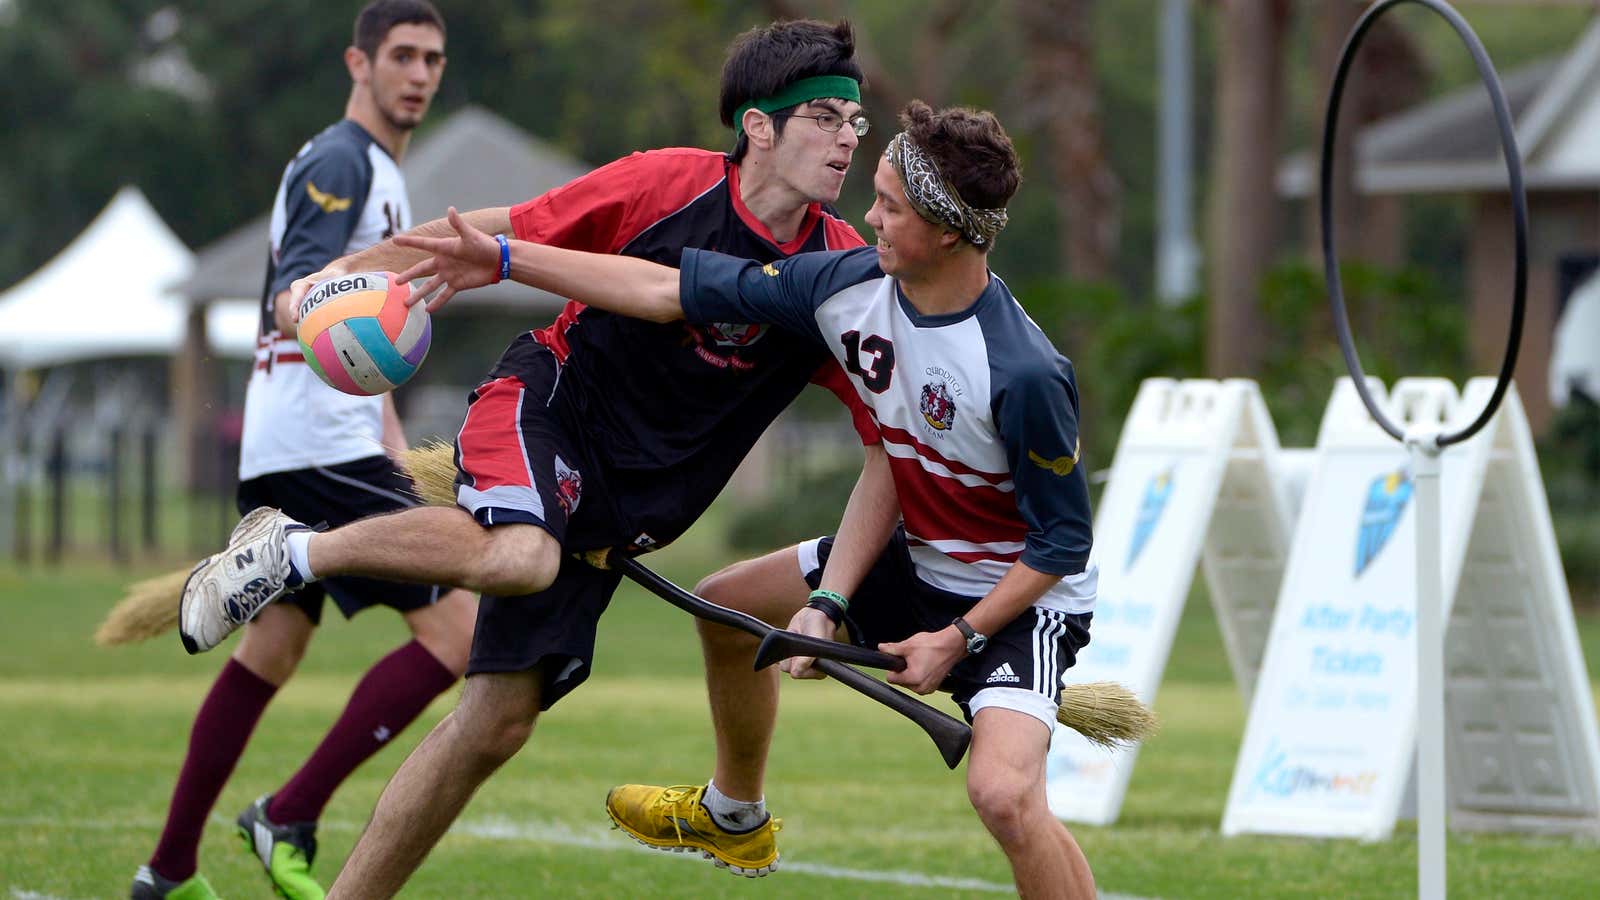 The “Silicon Valley Skrewts” in the very real Quidditch World Cup.